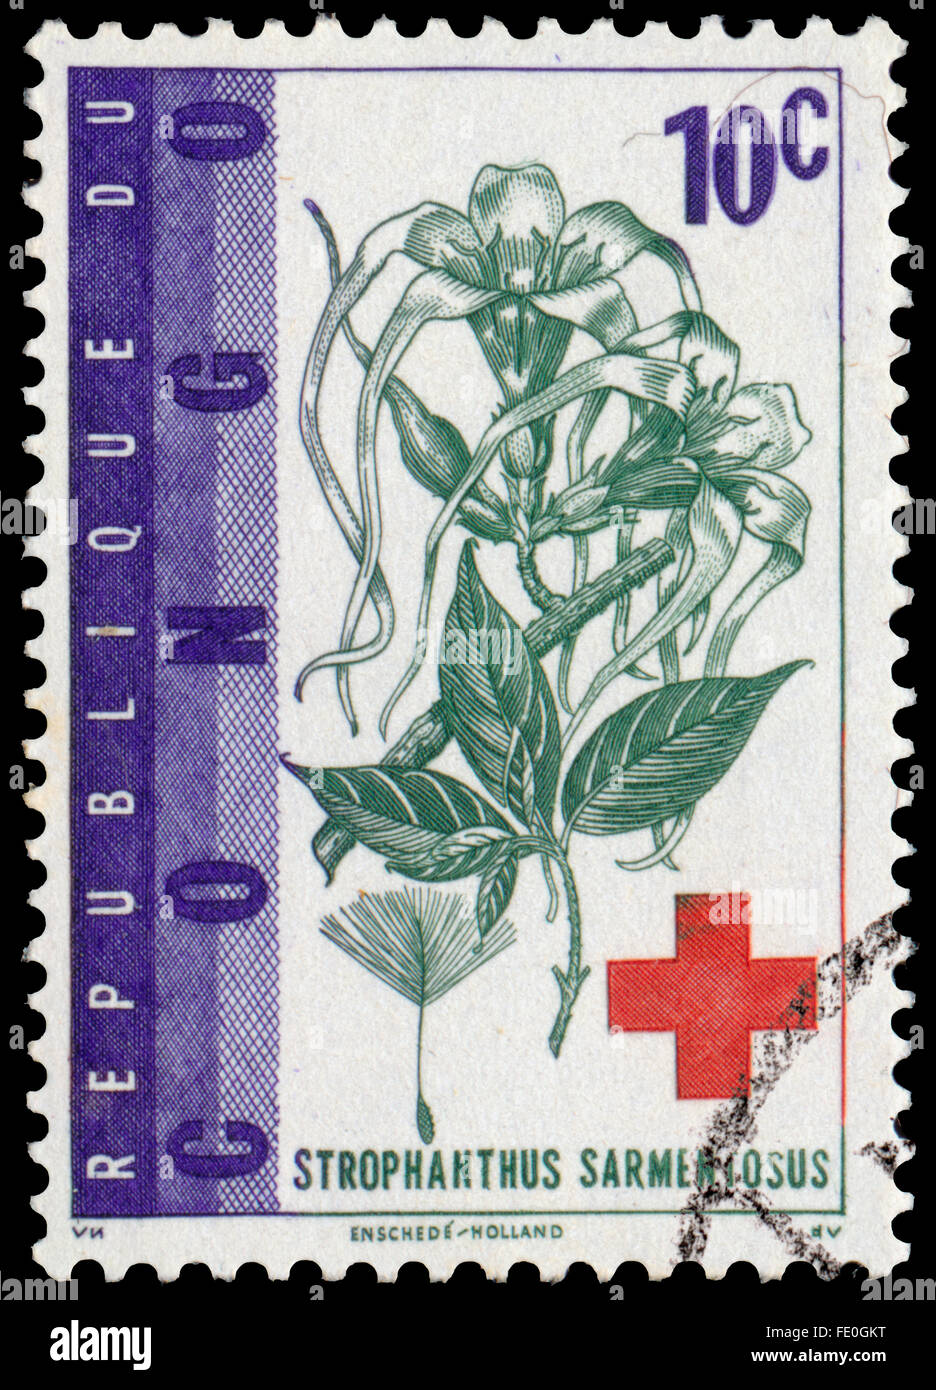 CONGO - CIRCA 1963: a stamp printed in Congo shows Strophanthus sarmentosus and red cross Stock Photo